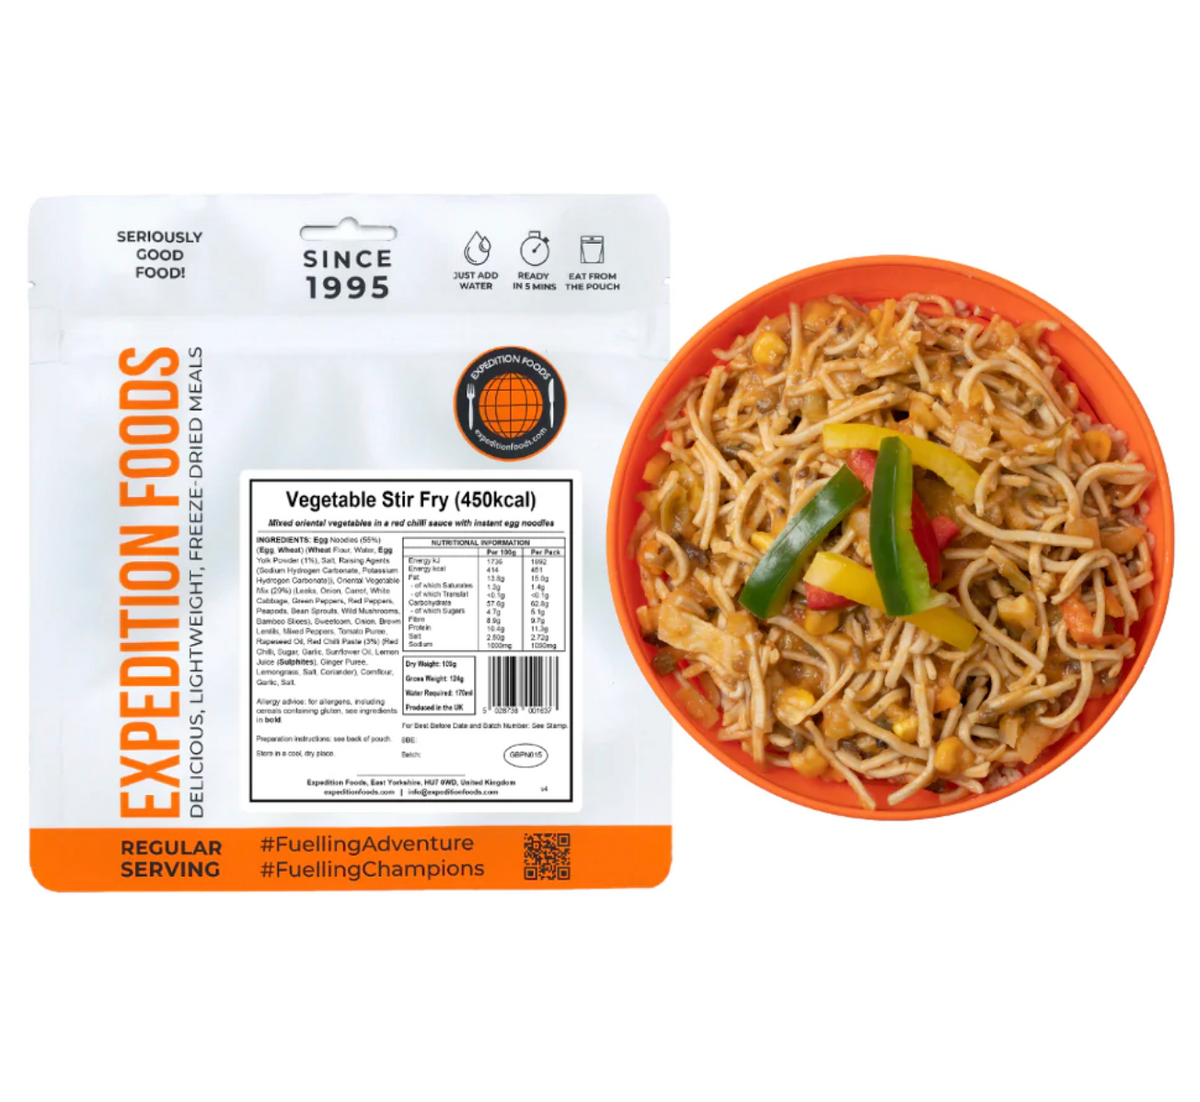 Expedition Foods Vegetable Stir Fry 450KCAL